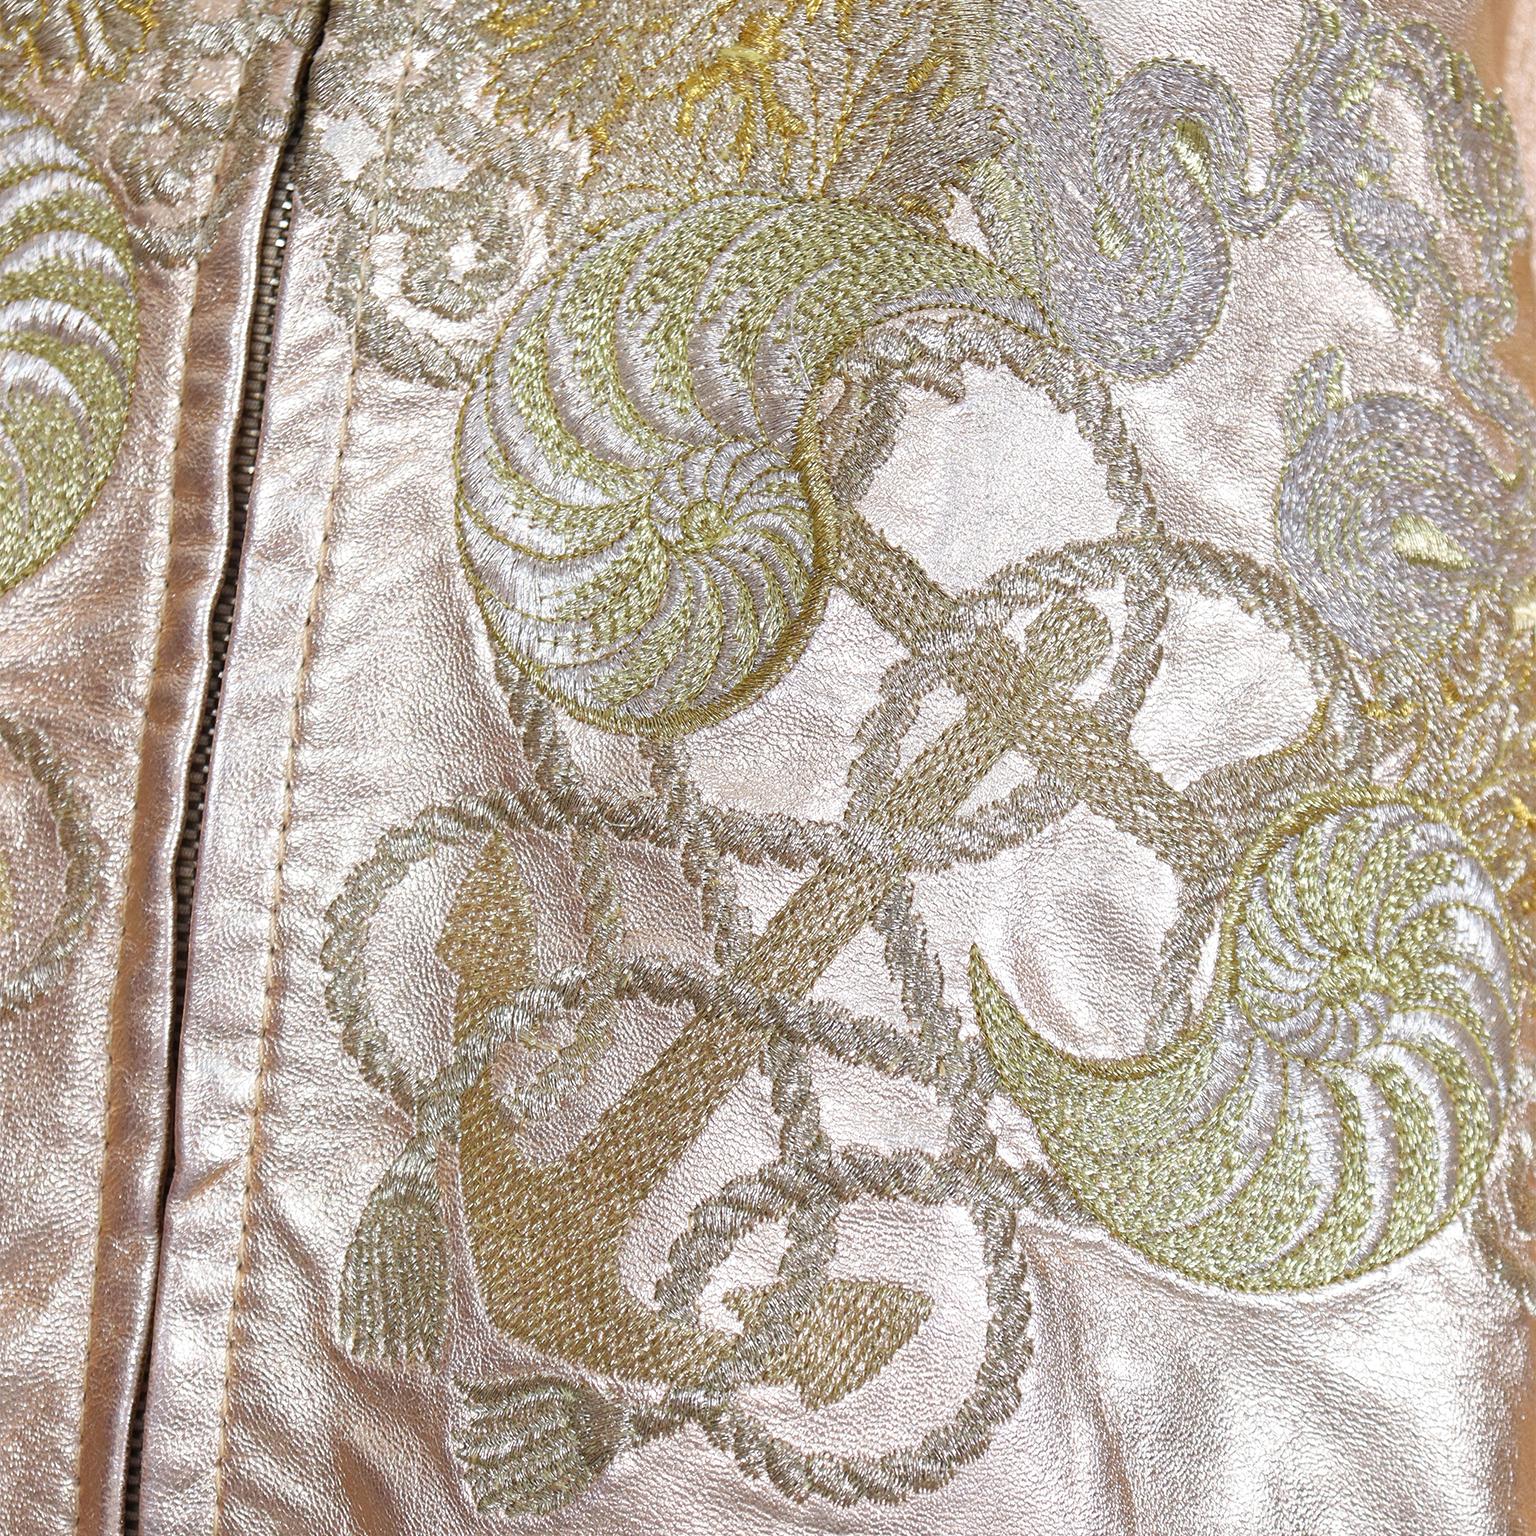 Gianfranco Ferre S/S 1992 Runway Gold Leather Embroidered Ocean Theme Jacket For Sale 10